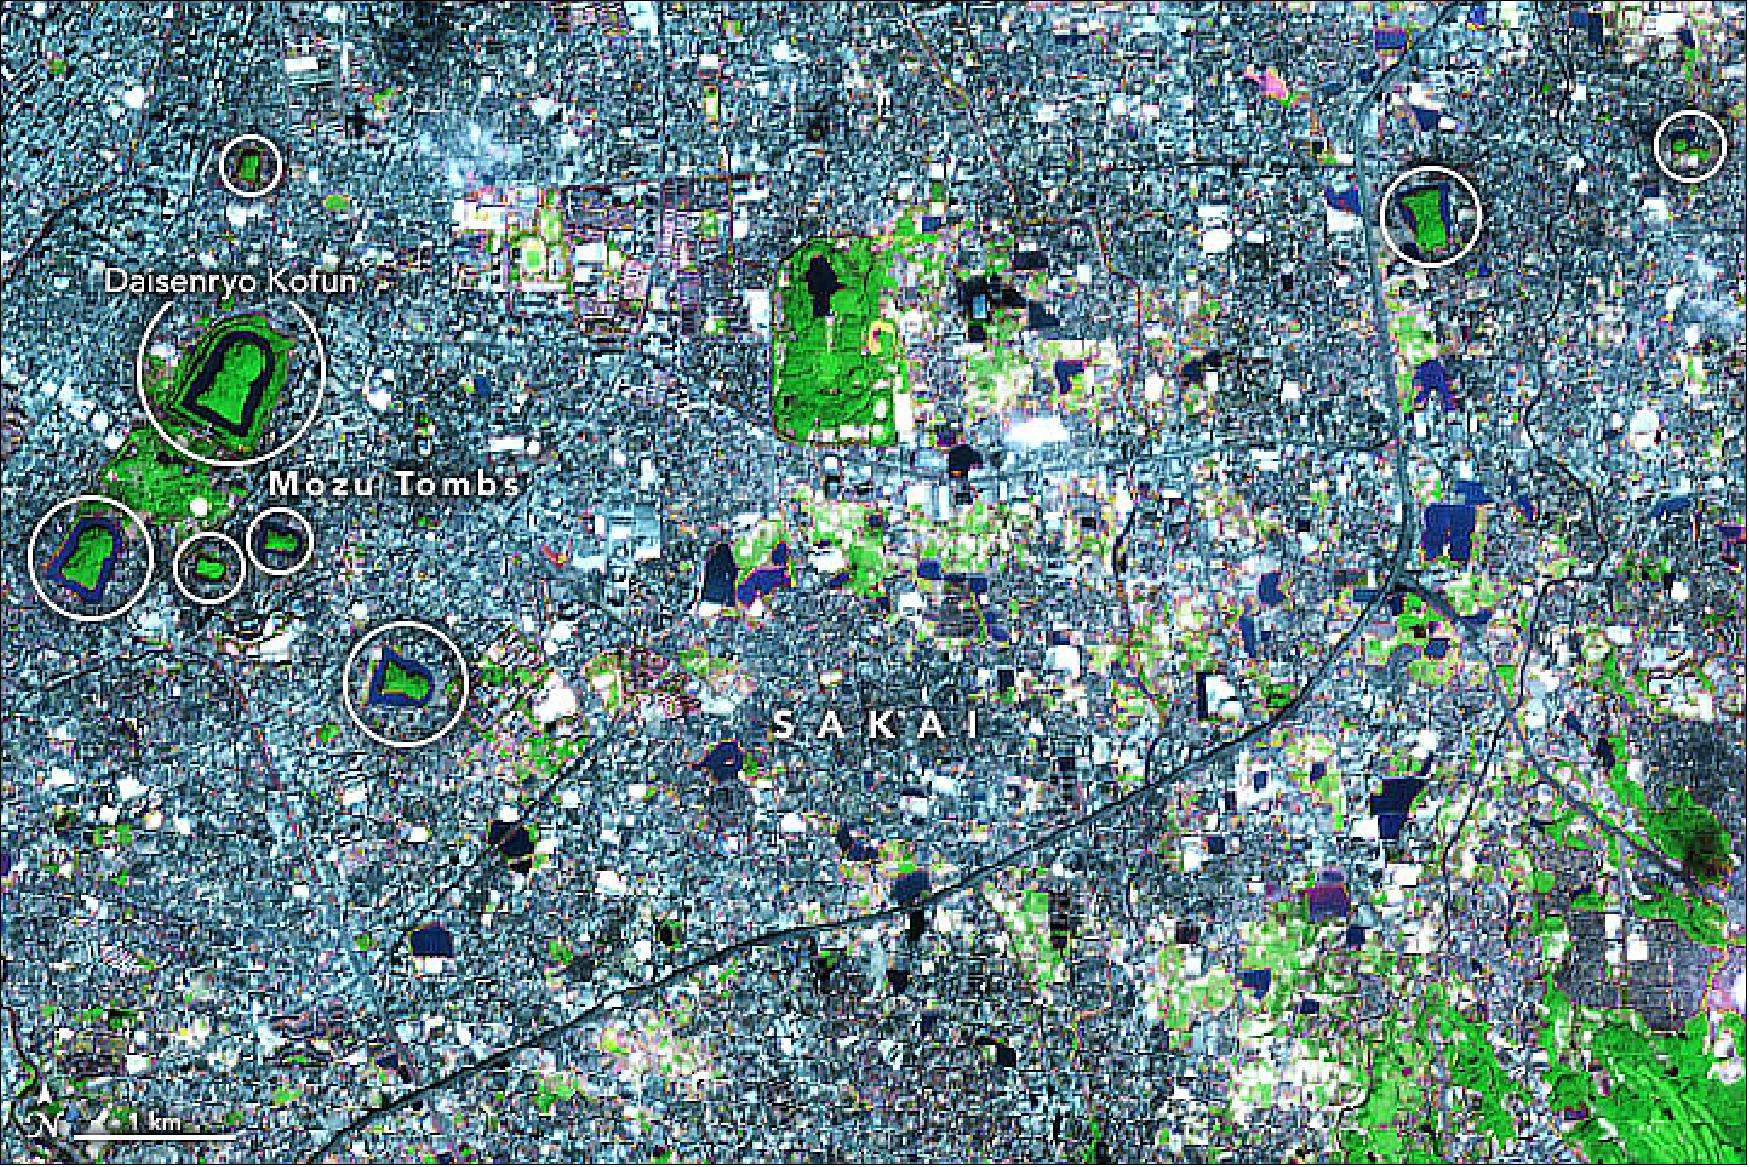 Figure 9: This image shows several kofun collectively known as the Mozu-Furuichi Kofun Group. The image of Sakai was acquired by the Advanced Spaceborne Thermal Emission and Reflection Radiometer (ASTER) on NASA’s Terra satellite on October 11, 2017. This false-color scene includes green, red, and near-infrared light, a combination that helps differentiate components of the landscape. Water is black, vegetation is green, and urban areas are gray (image credit: NASA Earth Observatory, image by Joshua Stevens, using data from NASA/METI/AIST/Japan Space Systems, and U.S./Japan ASTER Science Team. Story by Kasha Patel)